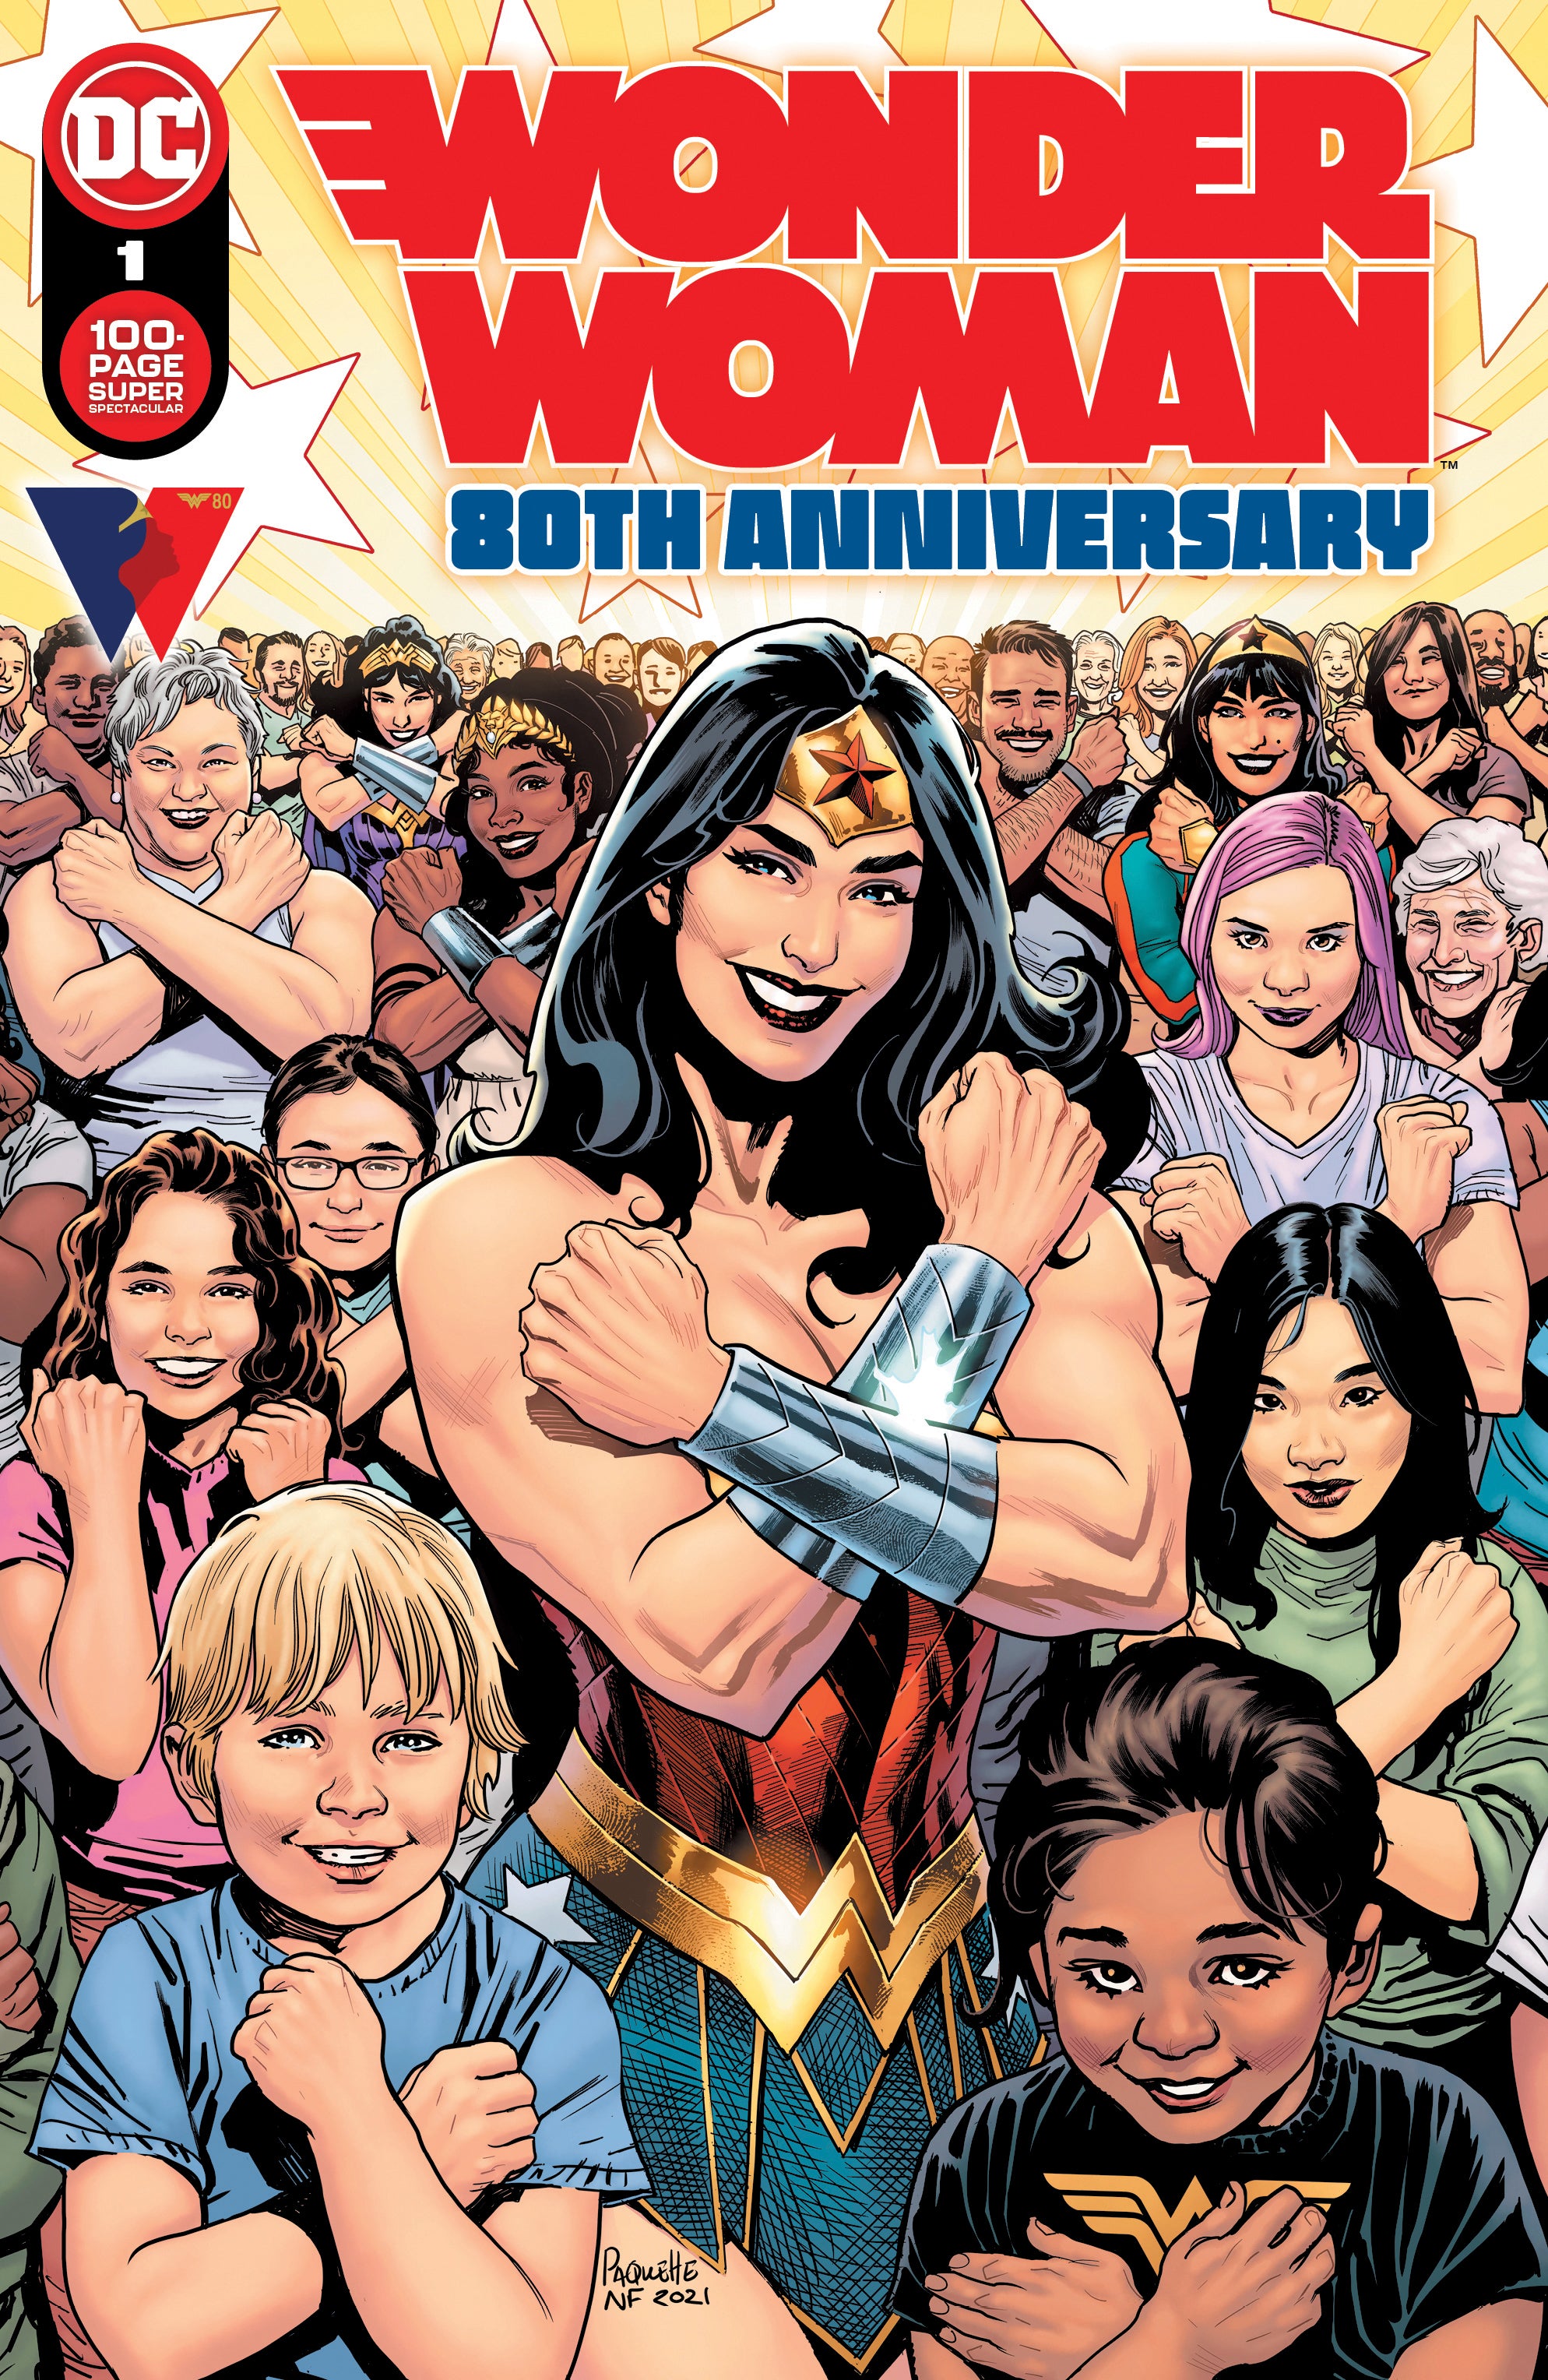 WONDER WOMAN 80TH ANNIVERSARY 100-PAGE SUPER SPECTACULAR #1 (ONE SHOT) CVR A YANICK PAQUETTE